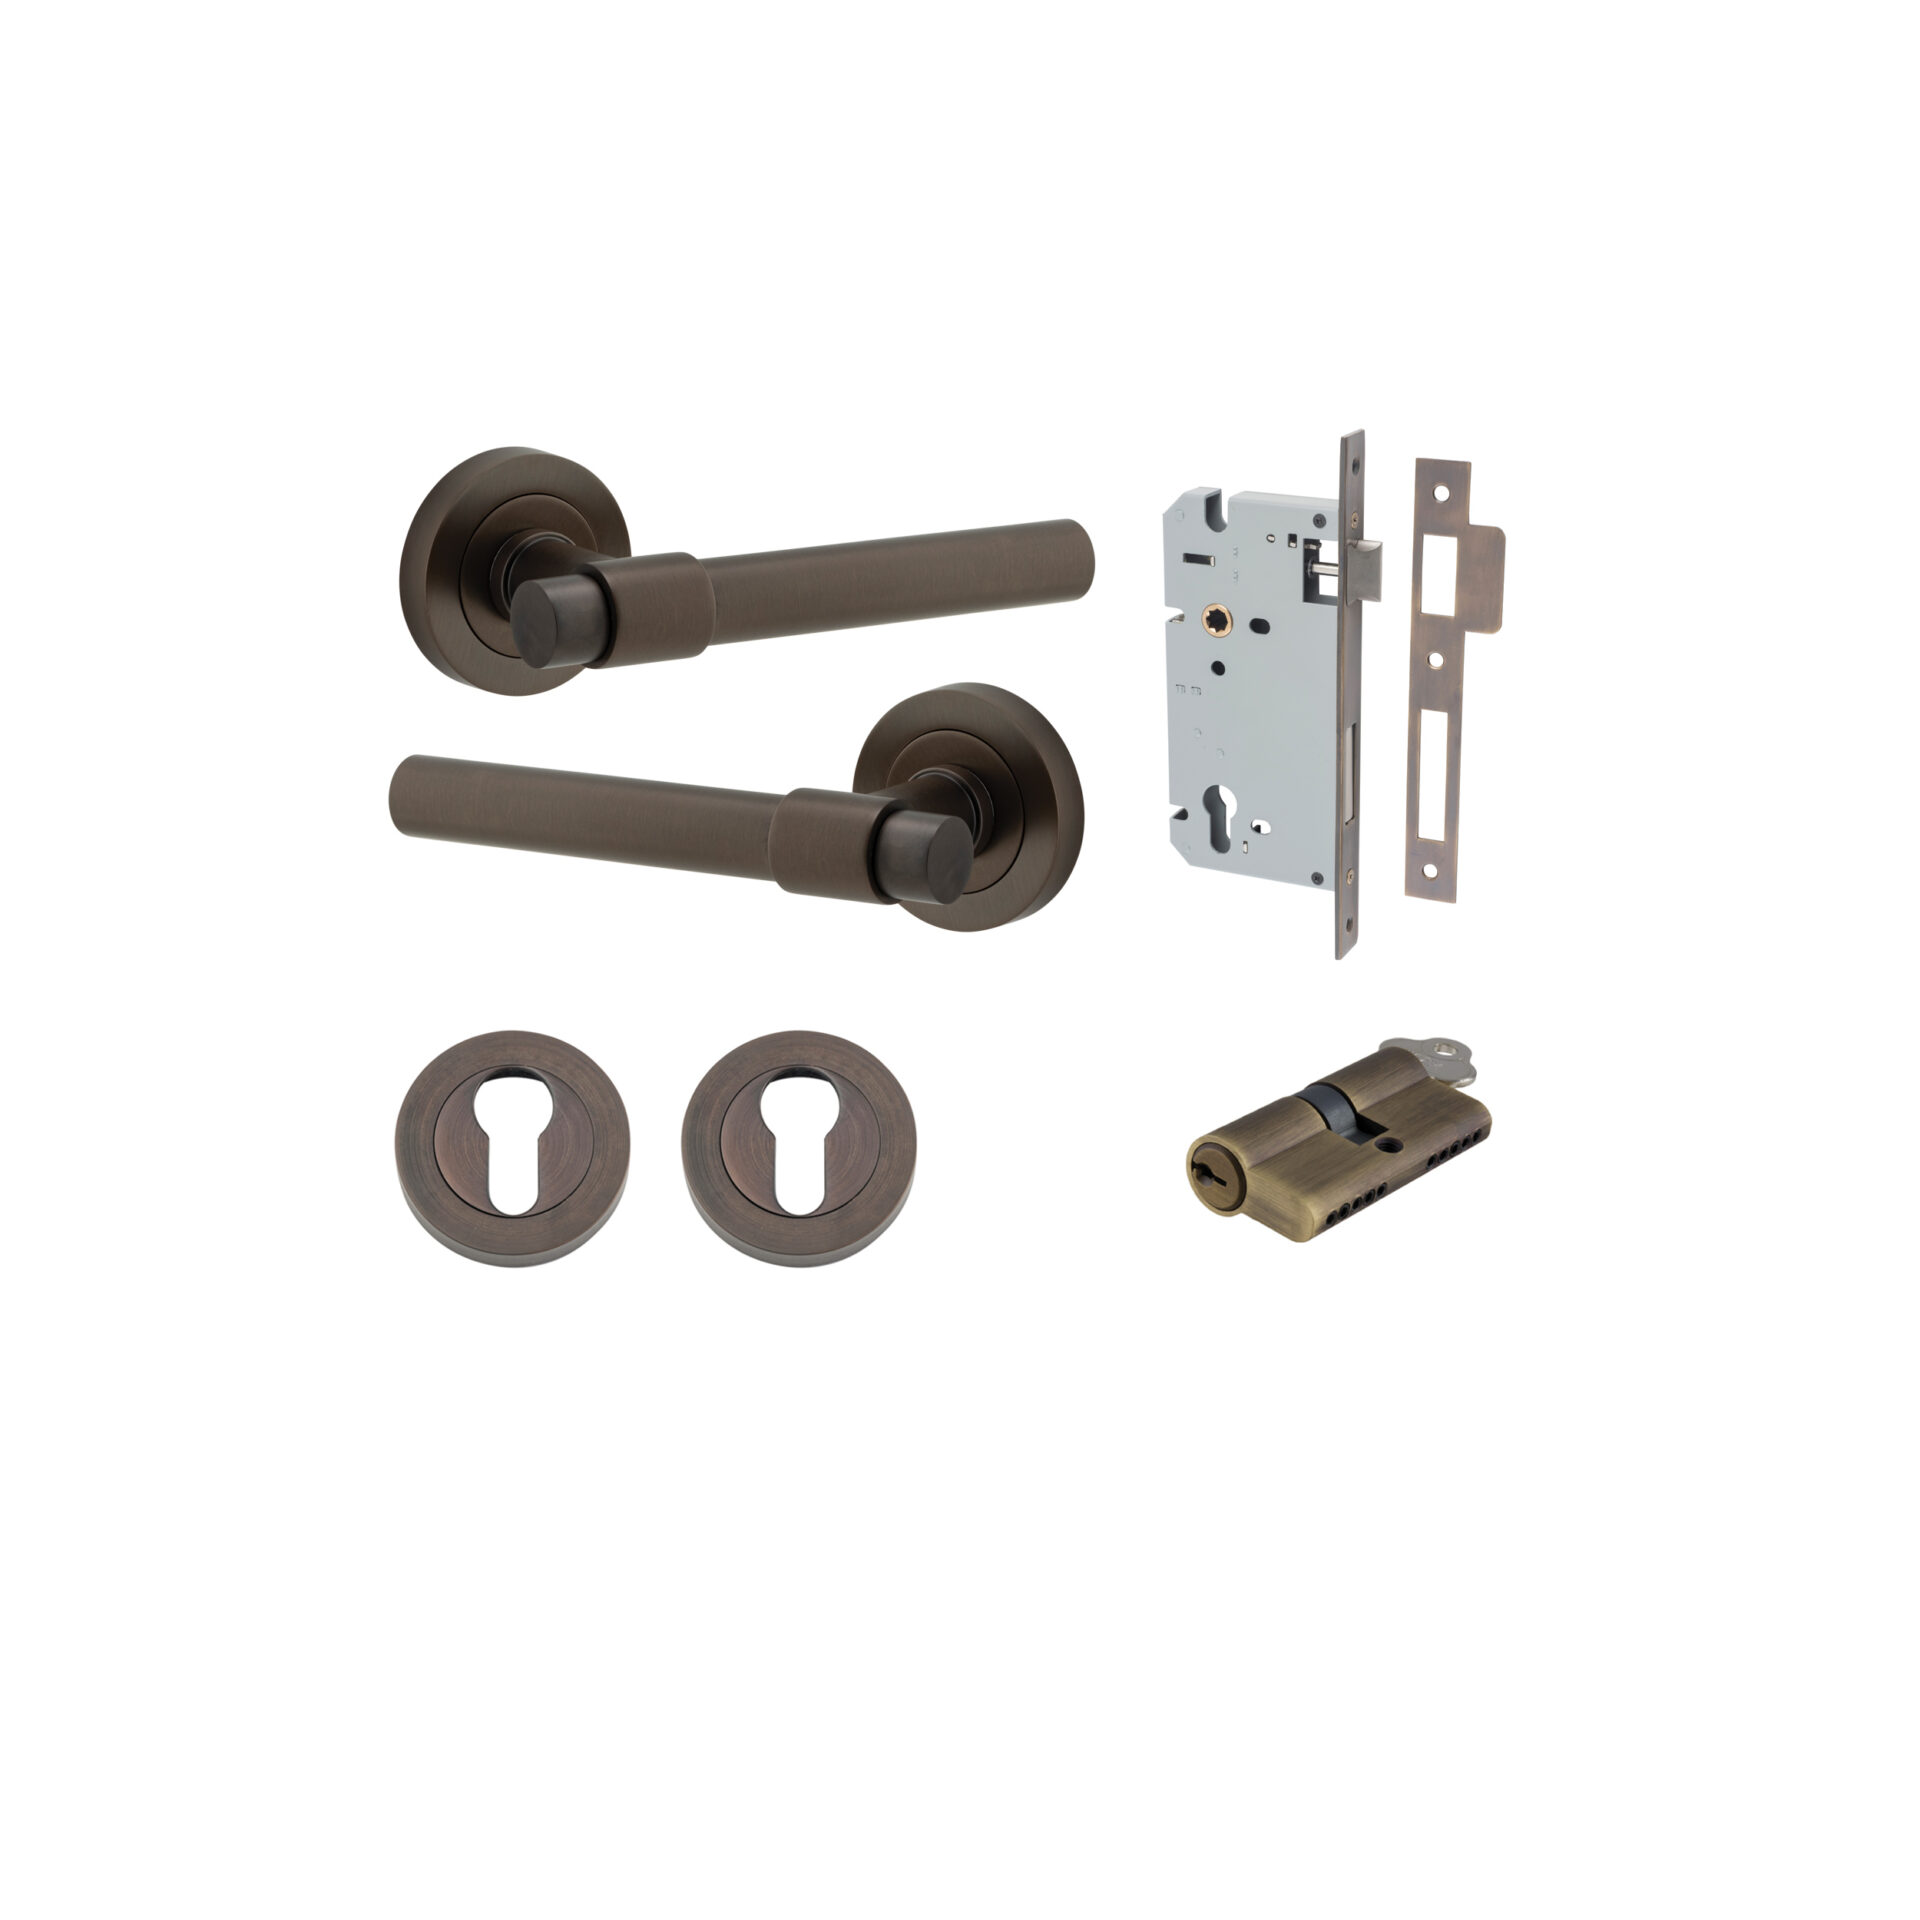 Helsinki Lever - Round Rose Entrance Kit with Separate High Security Lock